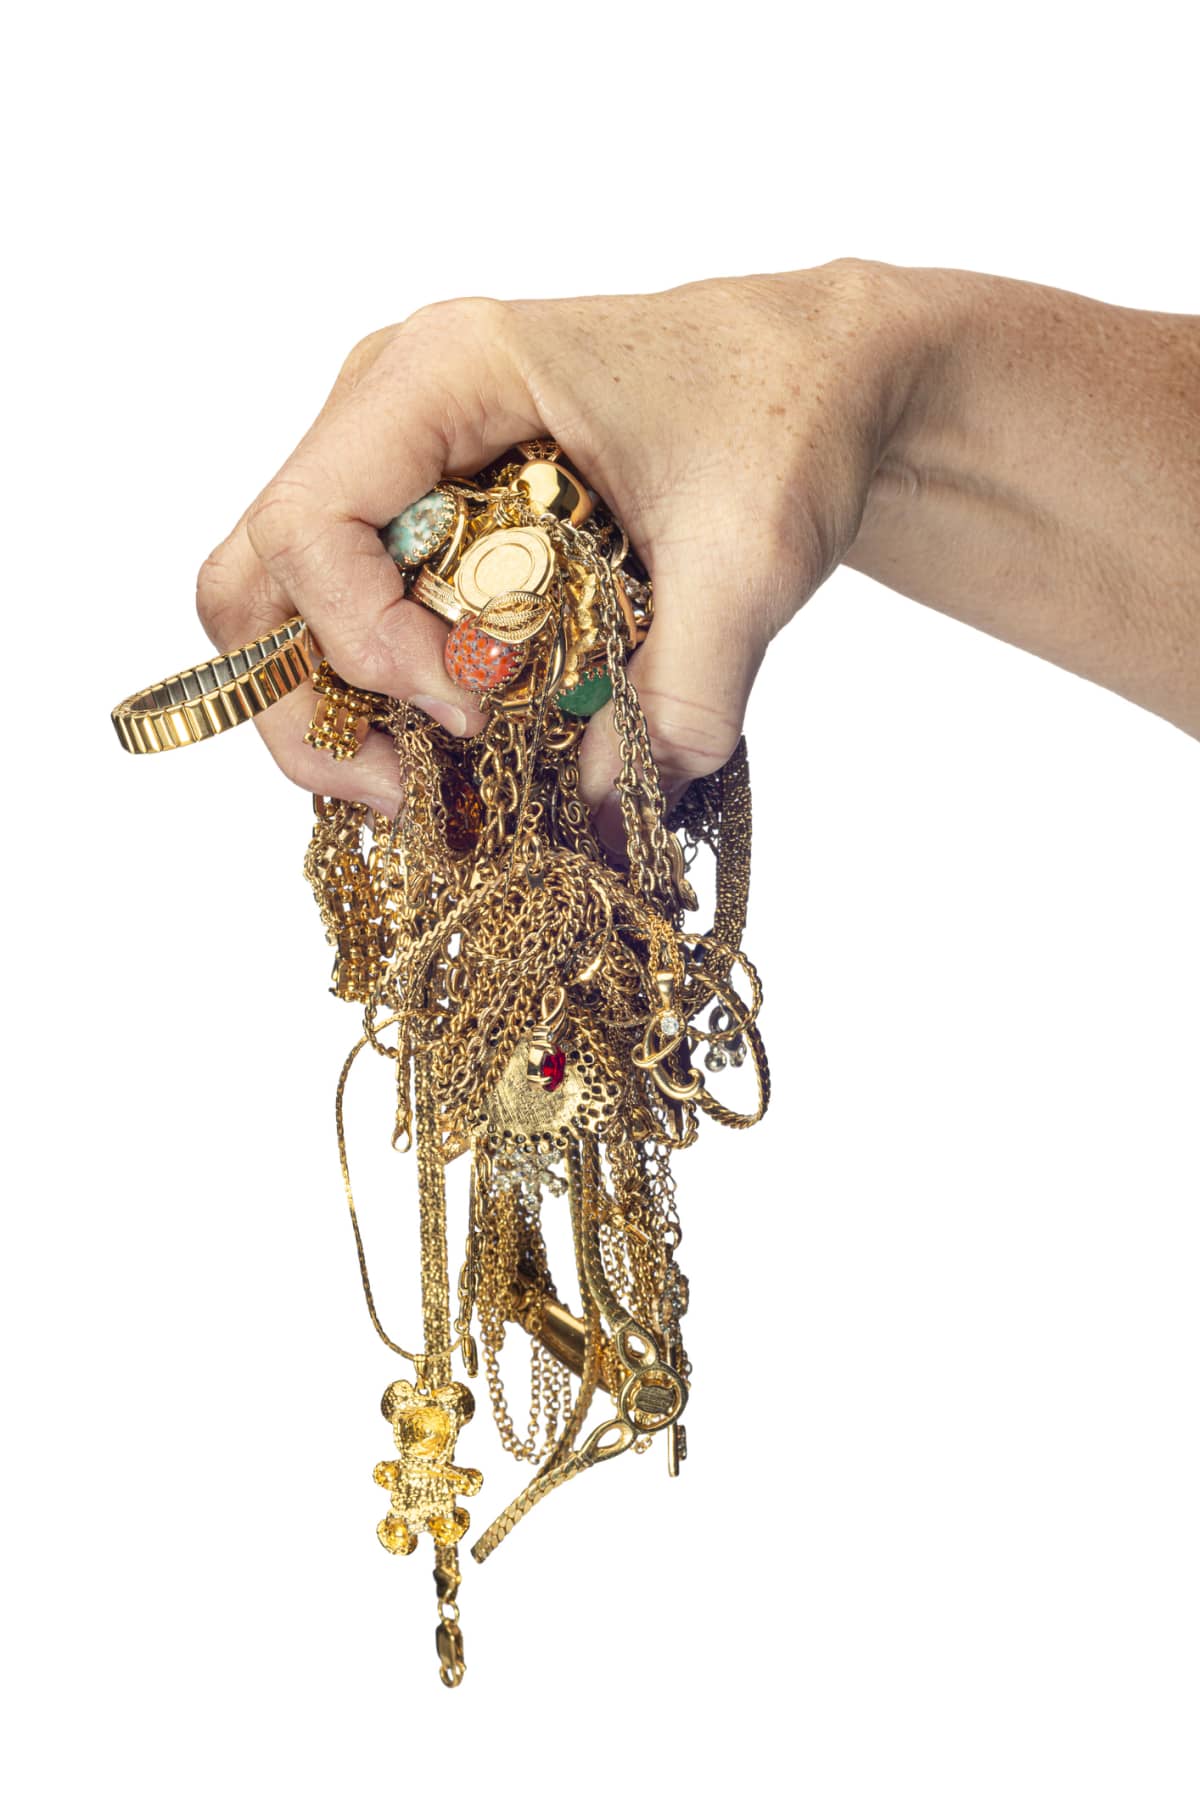 Vertical shot of a woman's hand holding tangled necklaces and bracelets